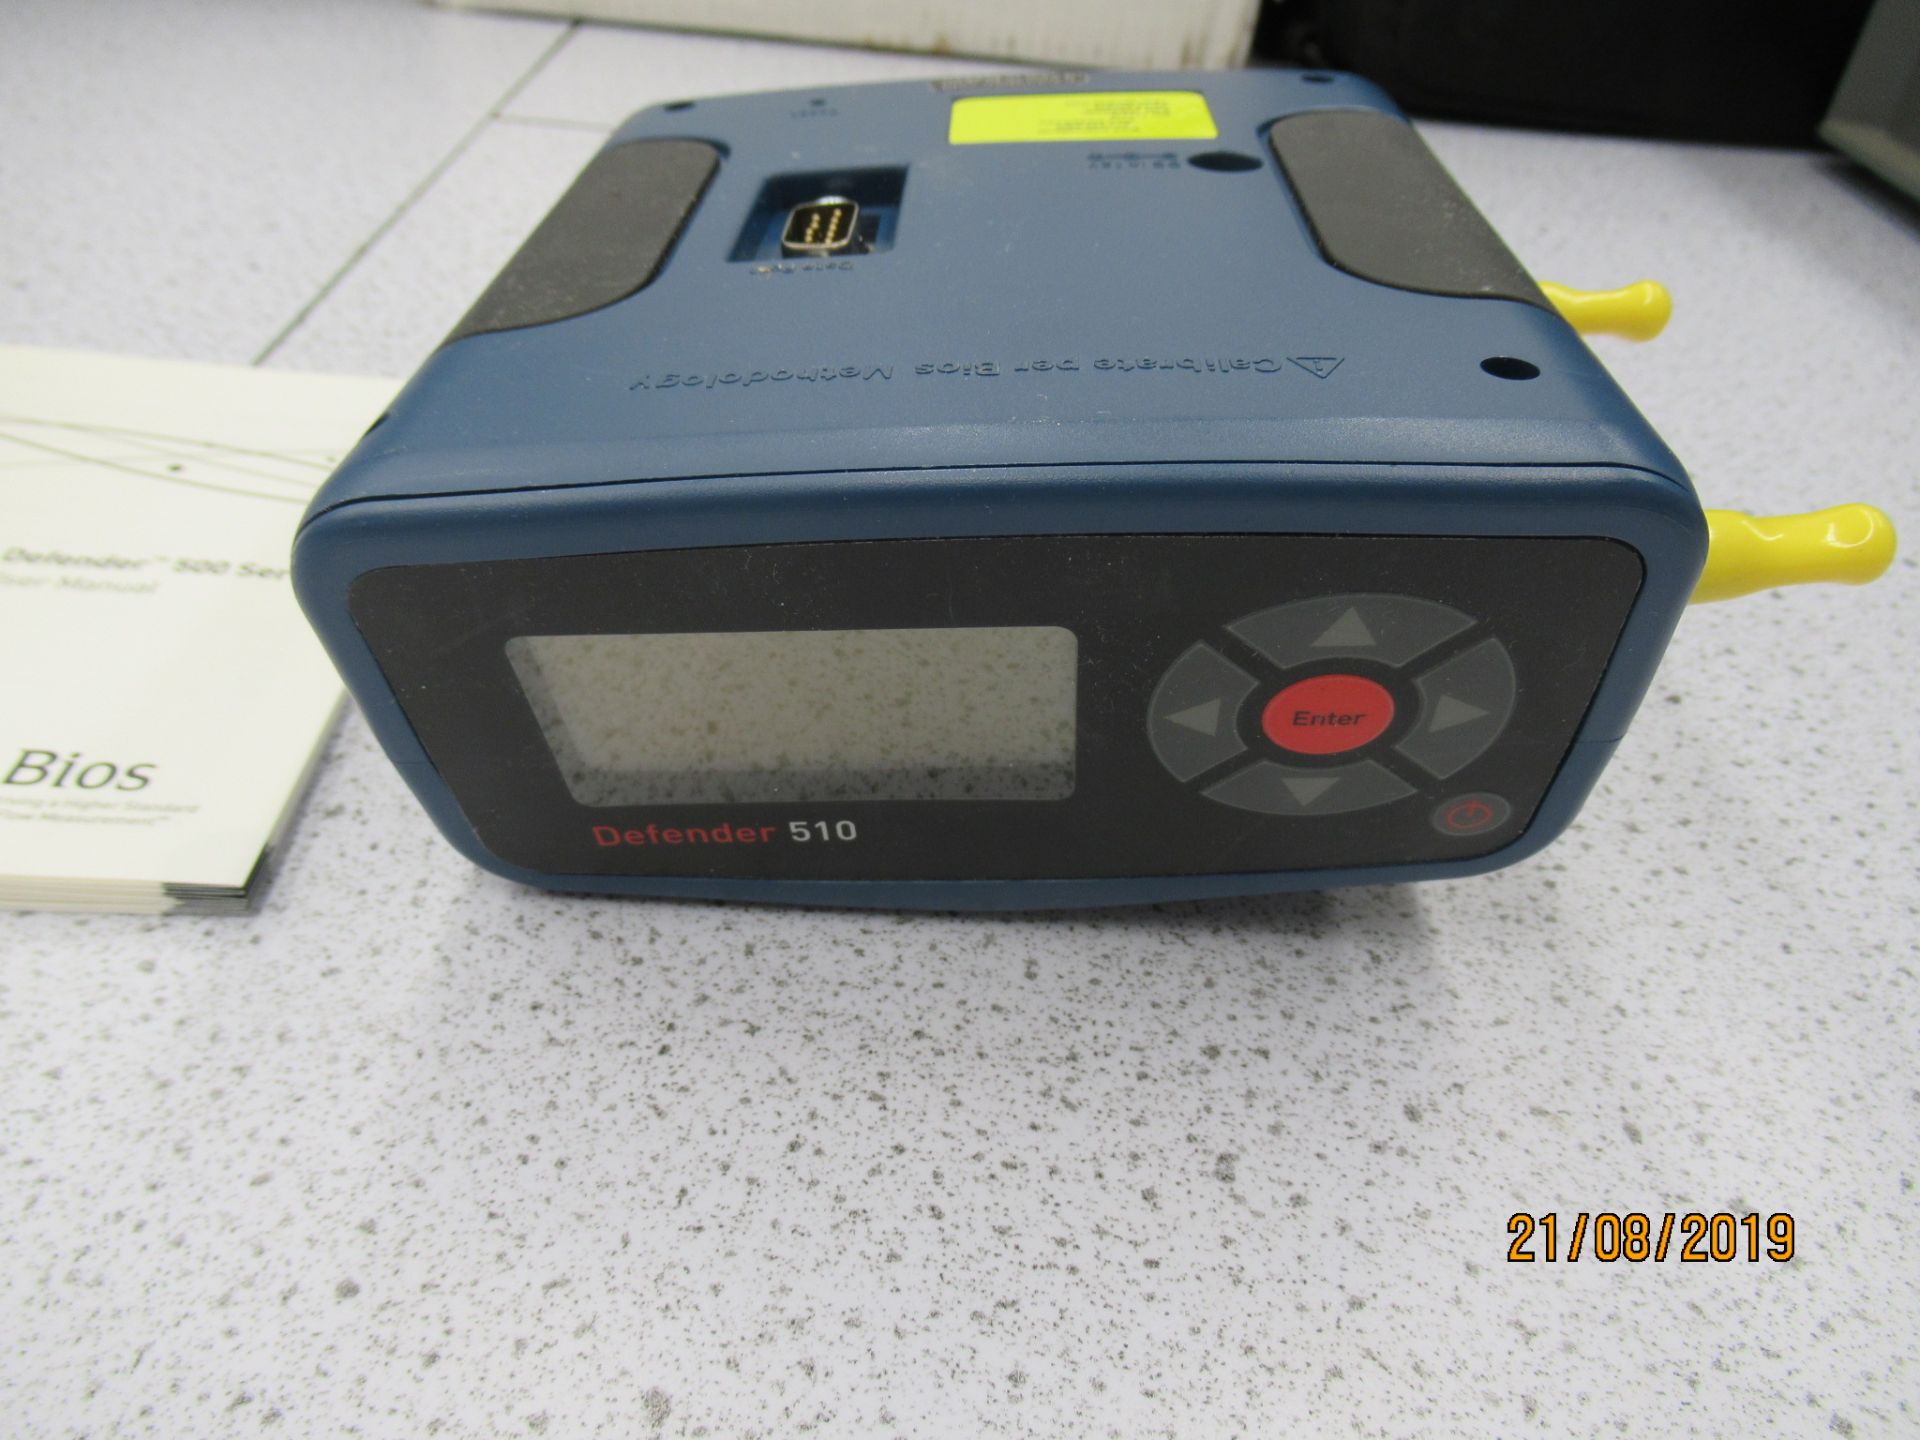 BIOS Defender, 510-M primary gas flow calibrator Size 150 x 180 x 170mm Serial No. 115476 - Image 2 of 3